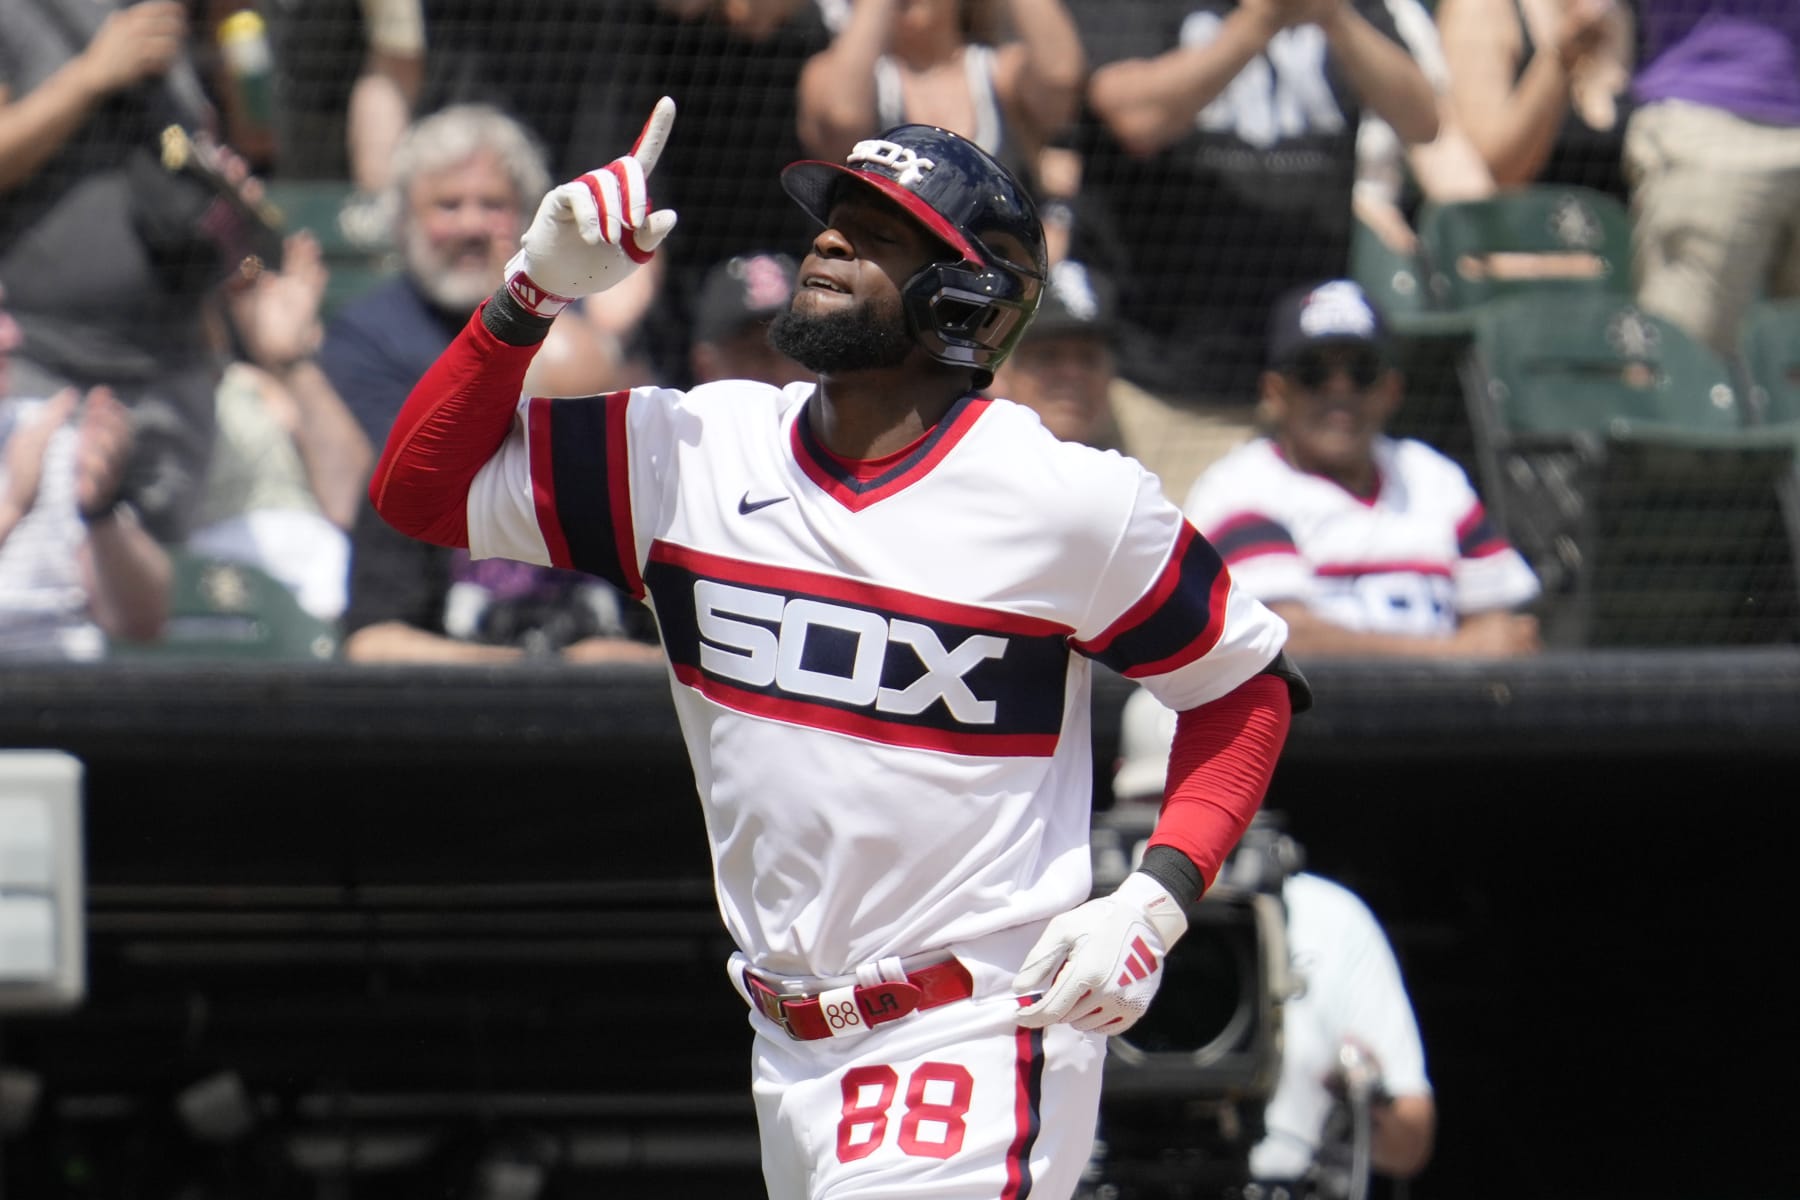 Luis Robert Jr. named top seed for Home Run Derby